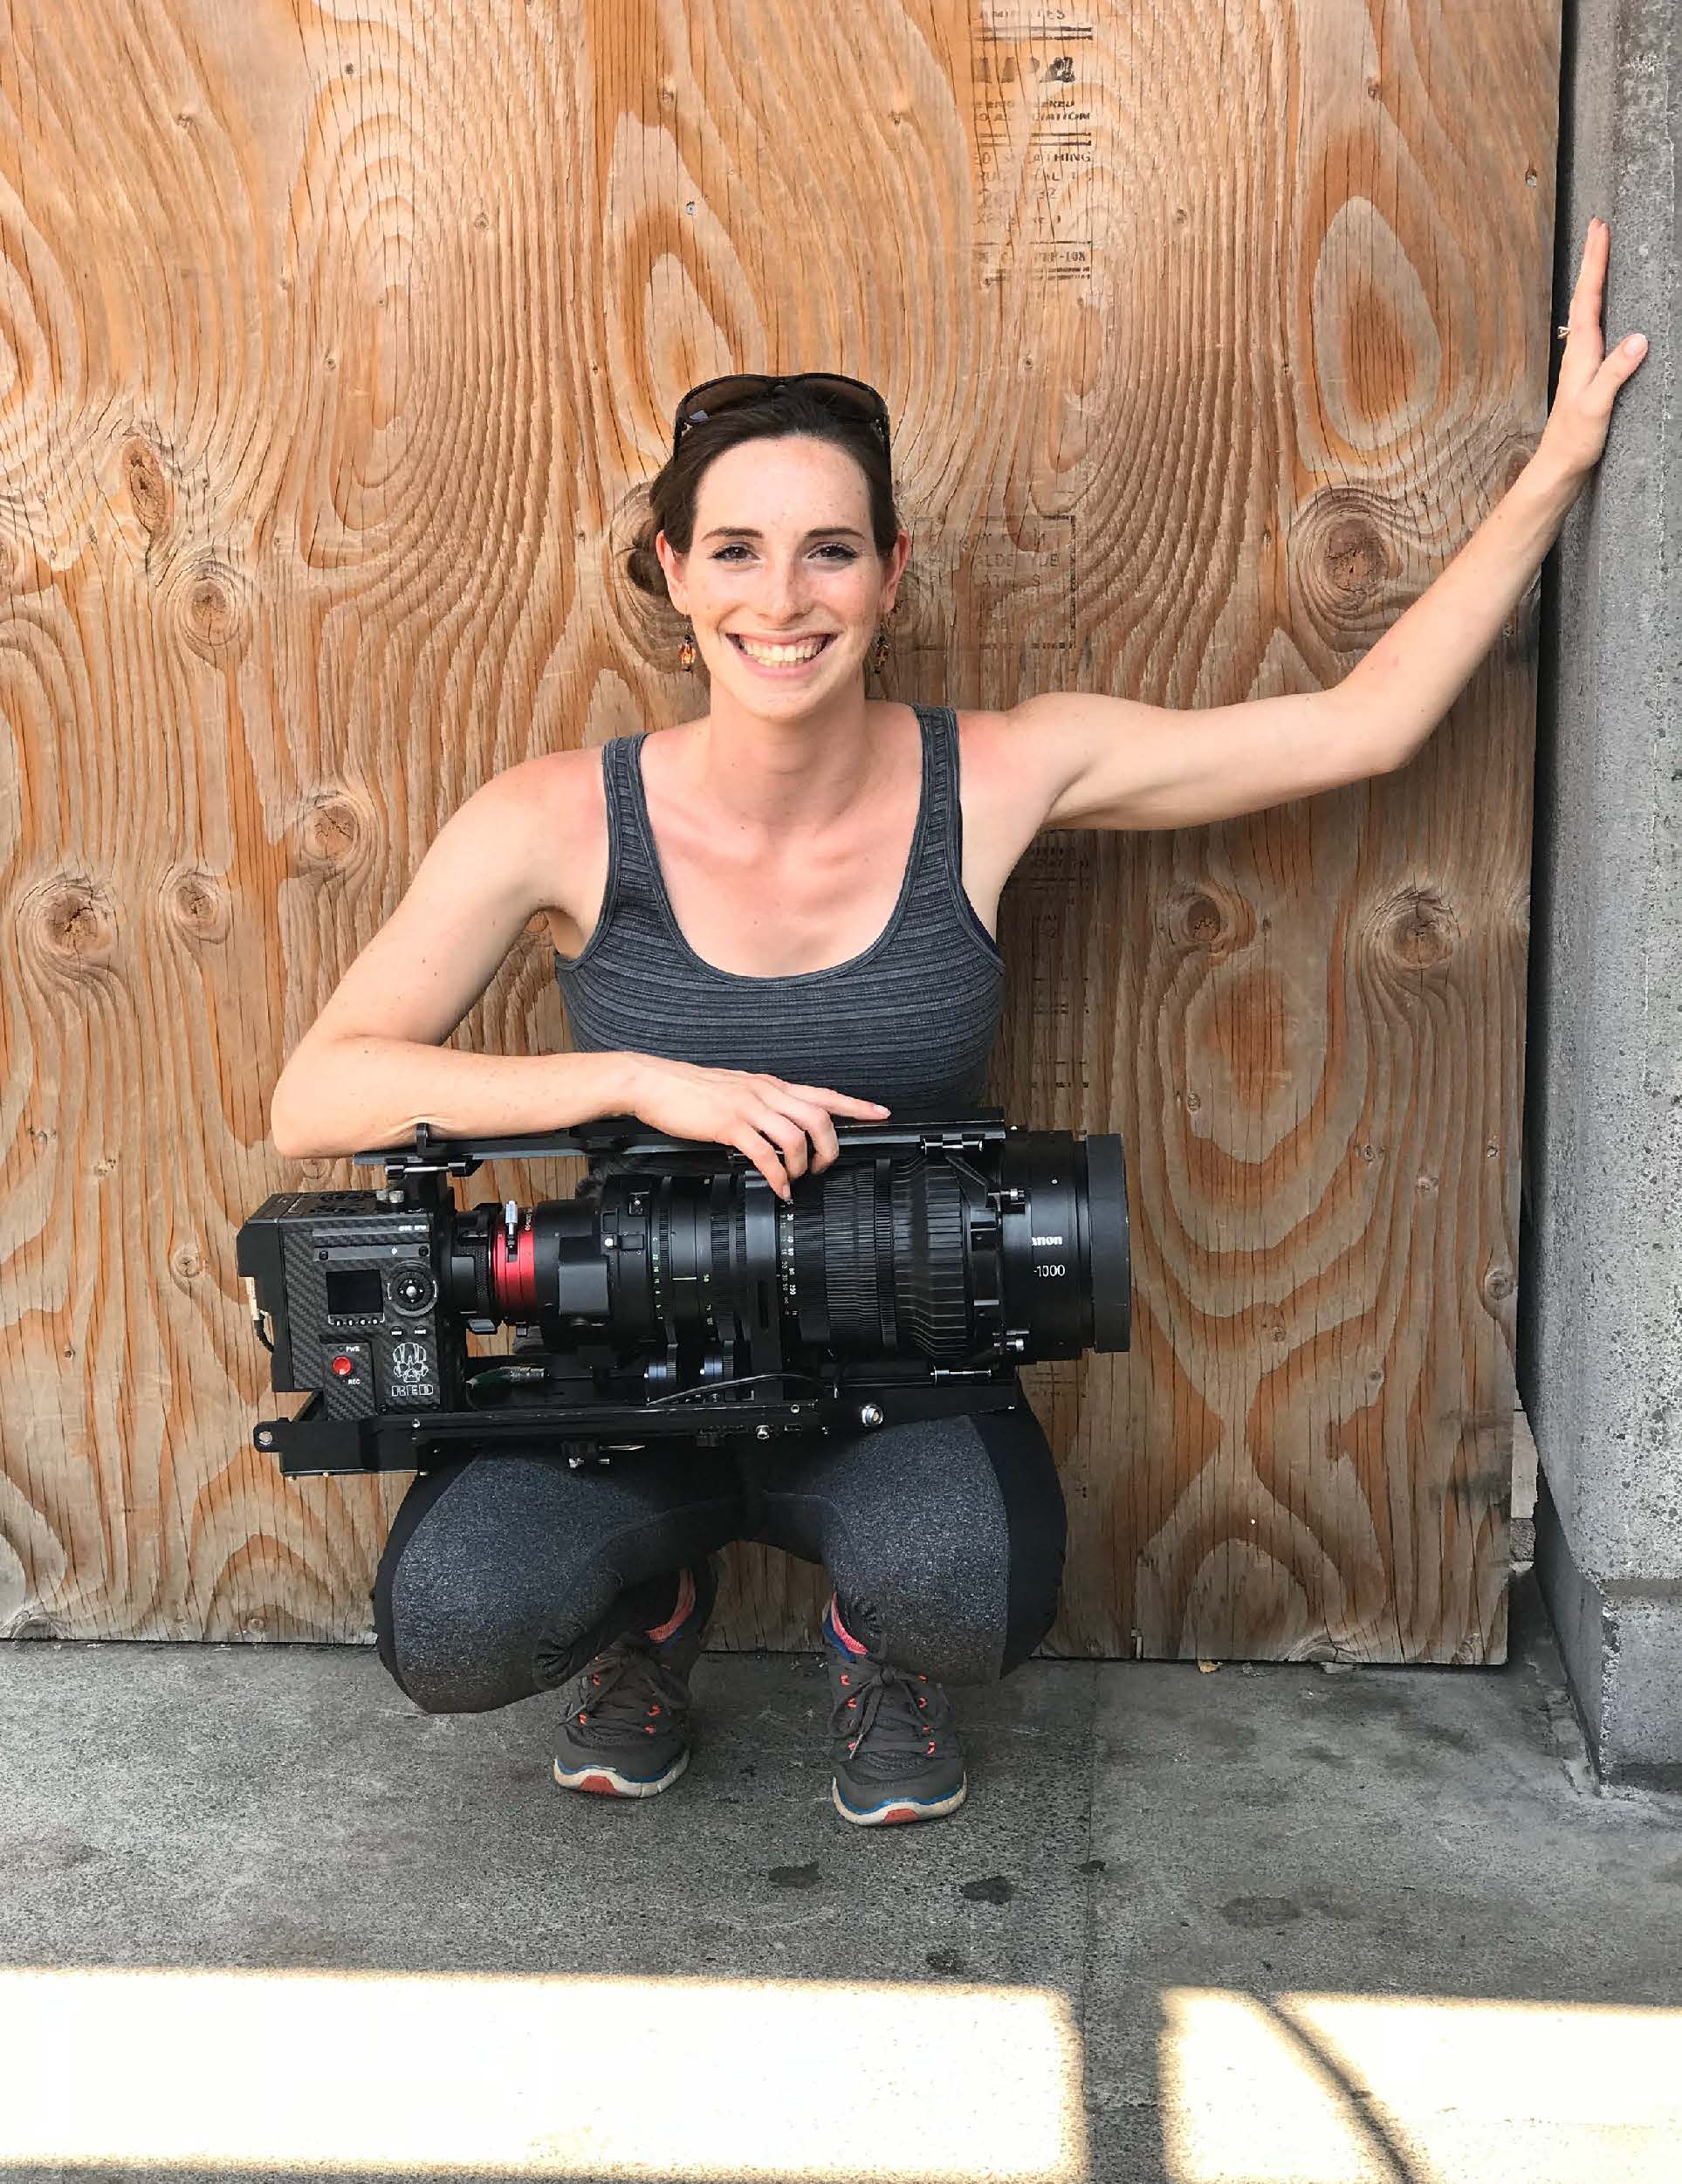 Dr. Raina Heaton PhD, Camera Assistant and Assistant Professor at the University of Oklahoma, with RED MONSTRO 8K and Canon CINE-SERVO 50-1000mm T5.0-8.9 PL.